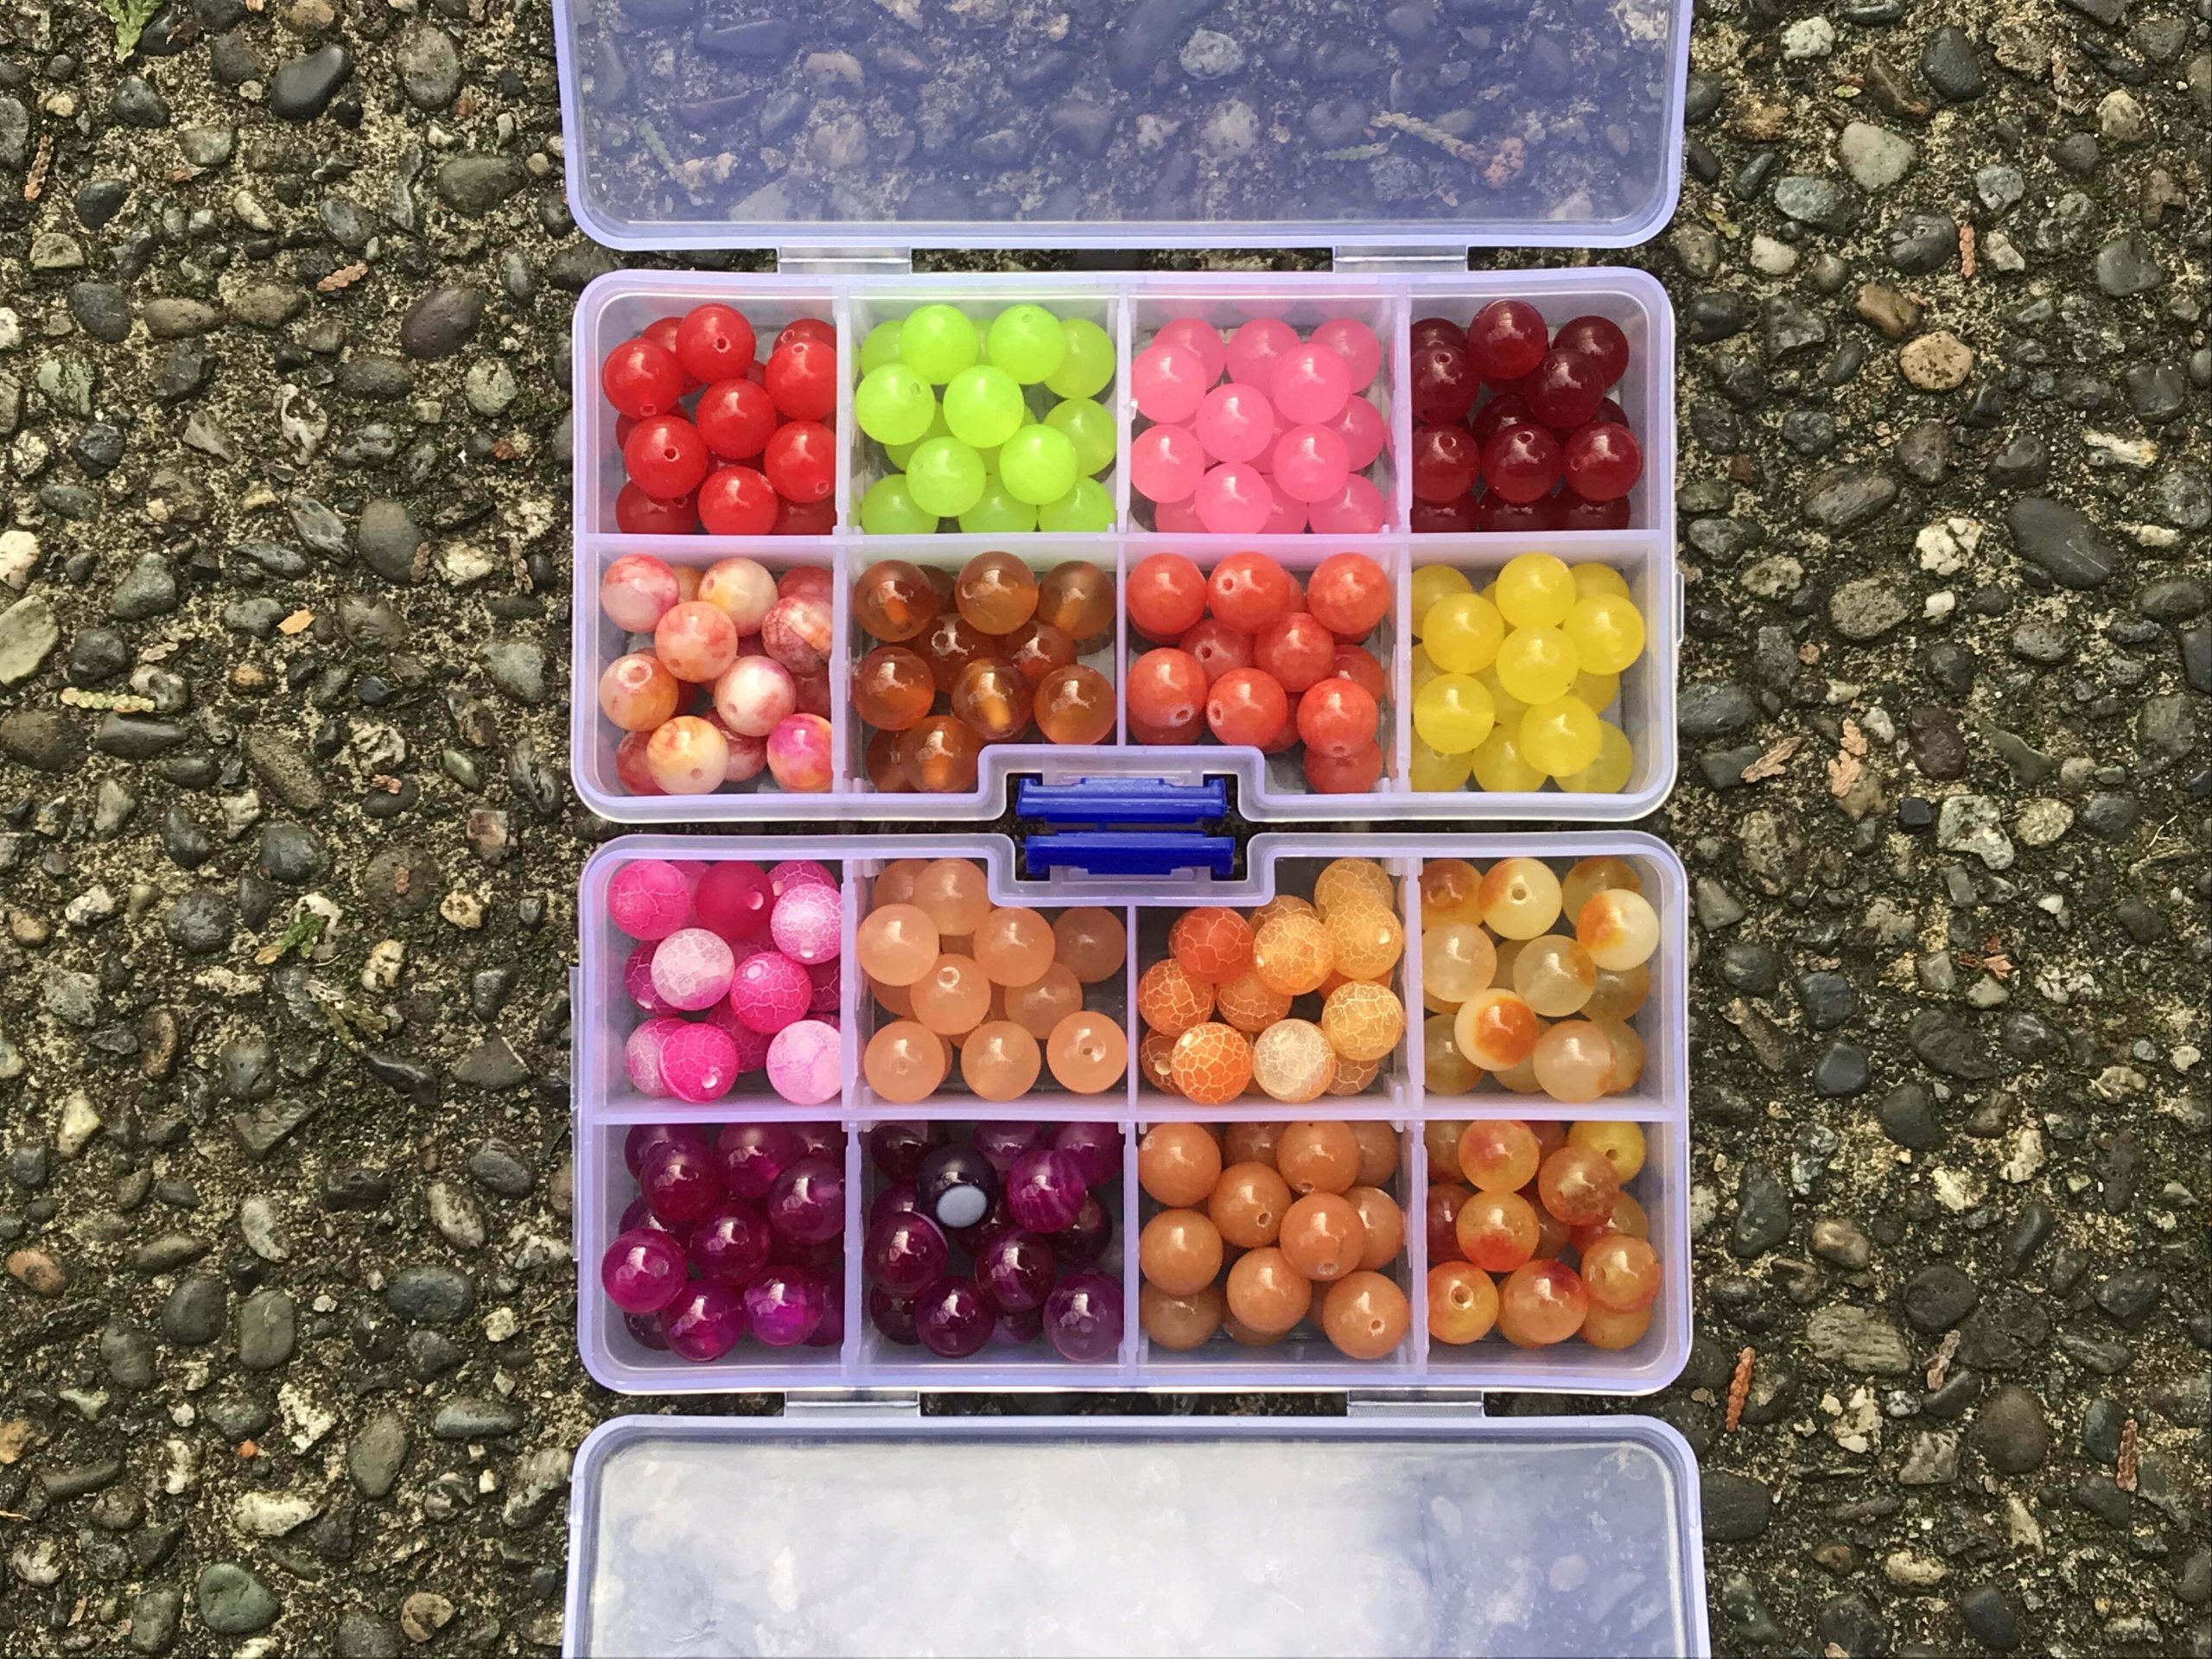 8 Color - 120 Count - 10mm Fishing Bead Combo Box Sets - Stone Cold Fishing  Beads